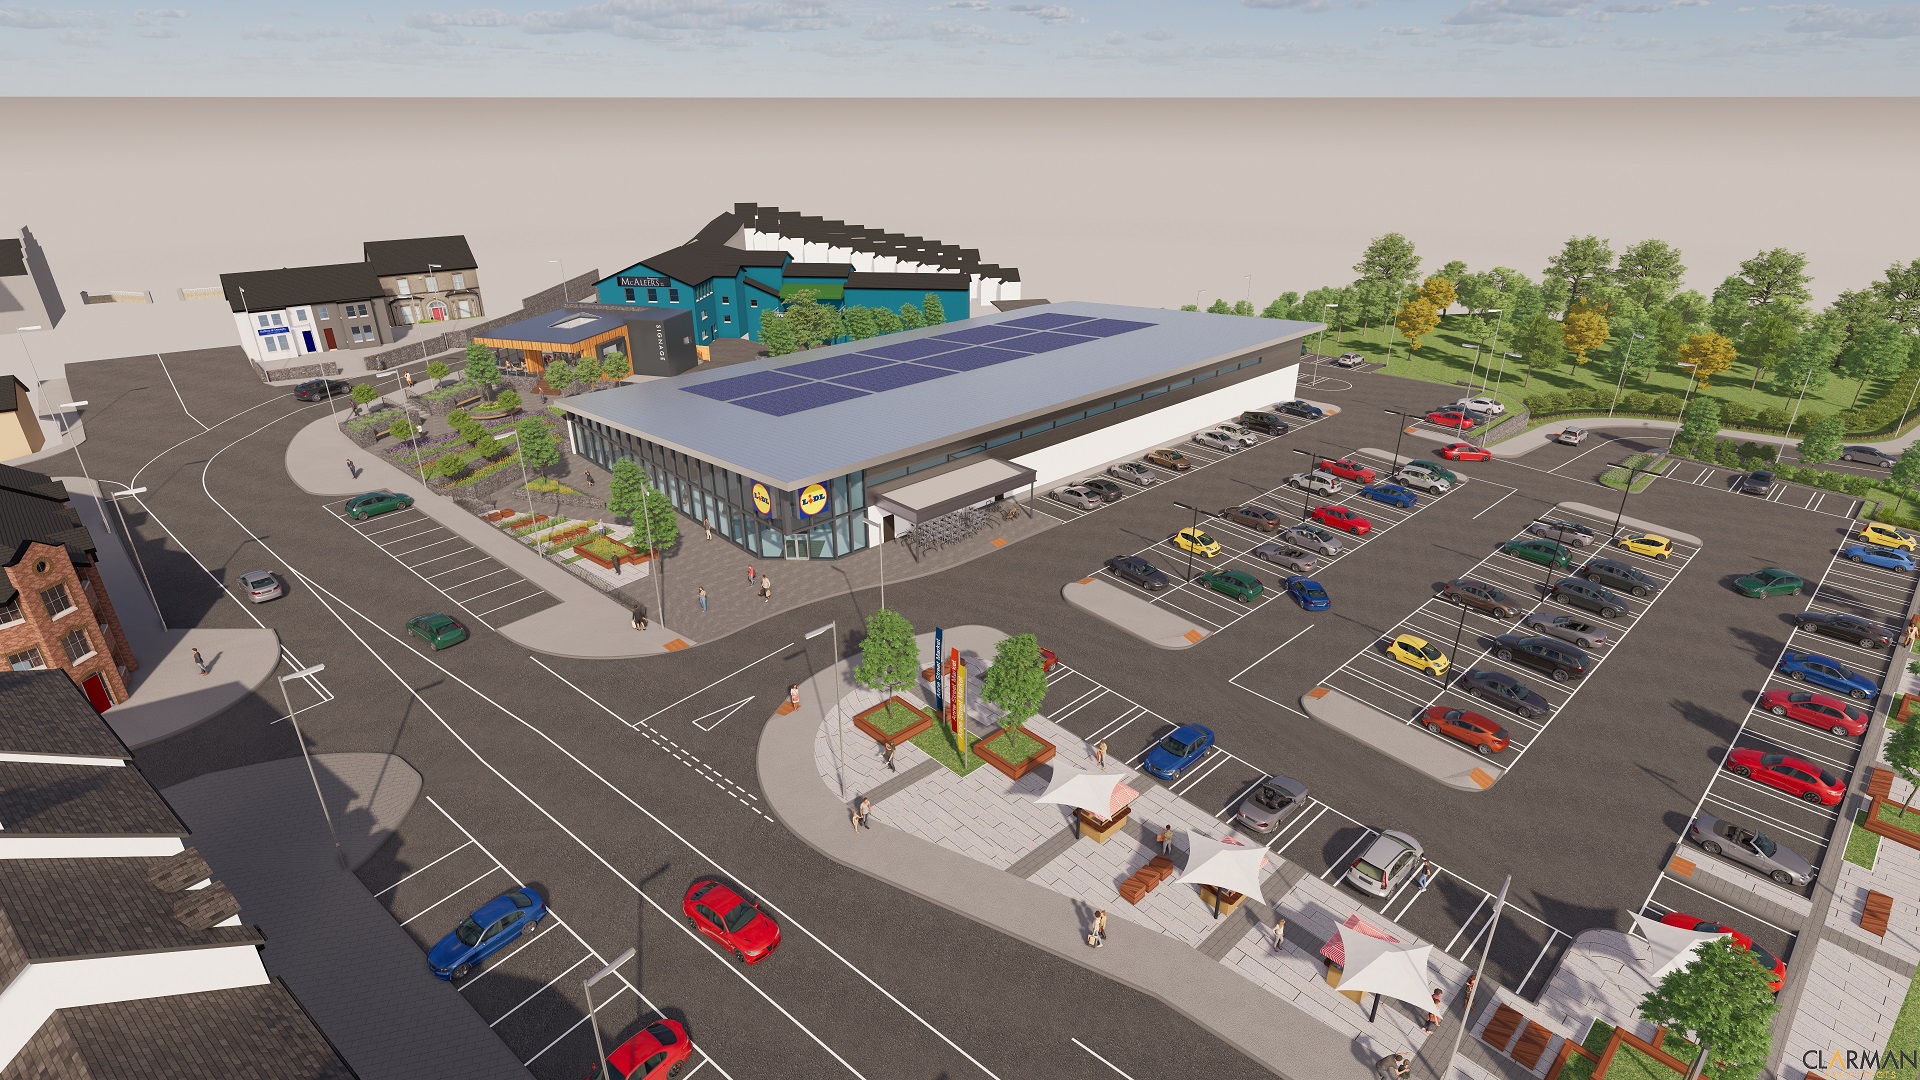 Lidl NI submits plans for new stores in Bangor, Craigavon and Dungannon